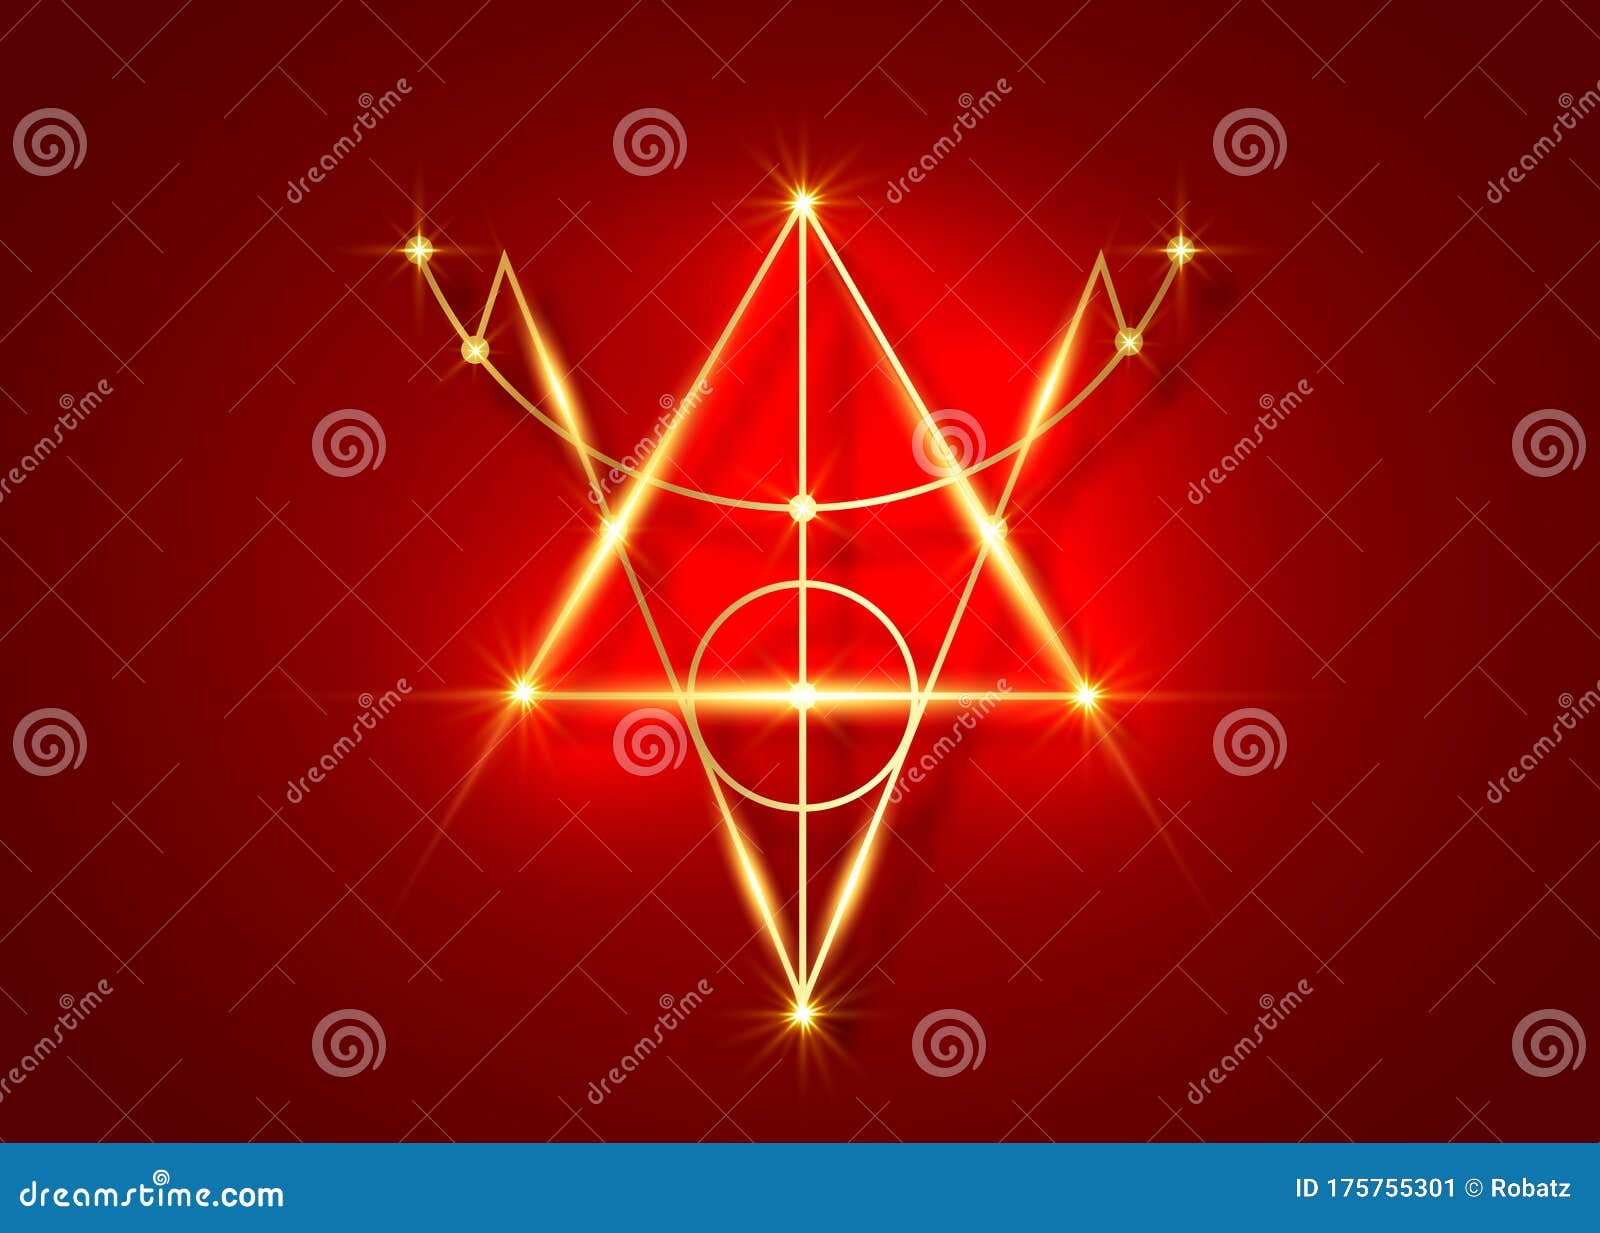 bright gold sigil of protection. magical amulet of light. can be used as tattoo, logos and prints. golden wiccan occult 